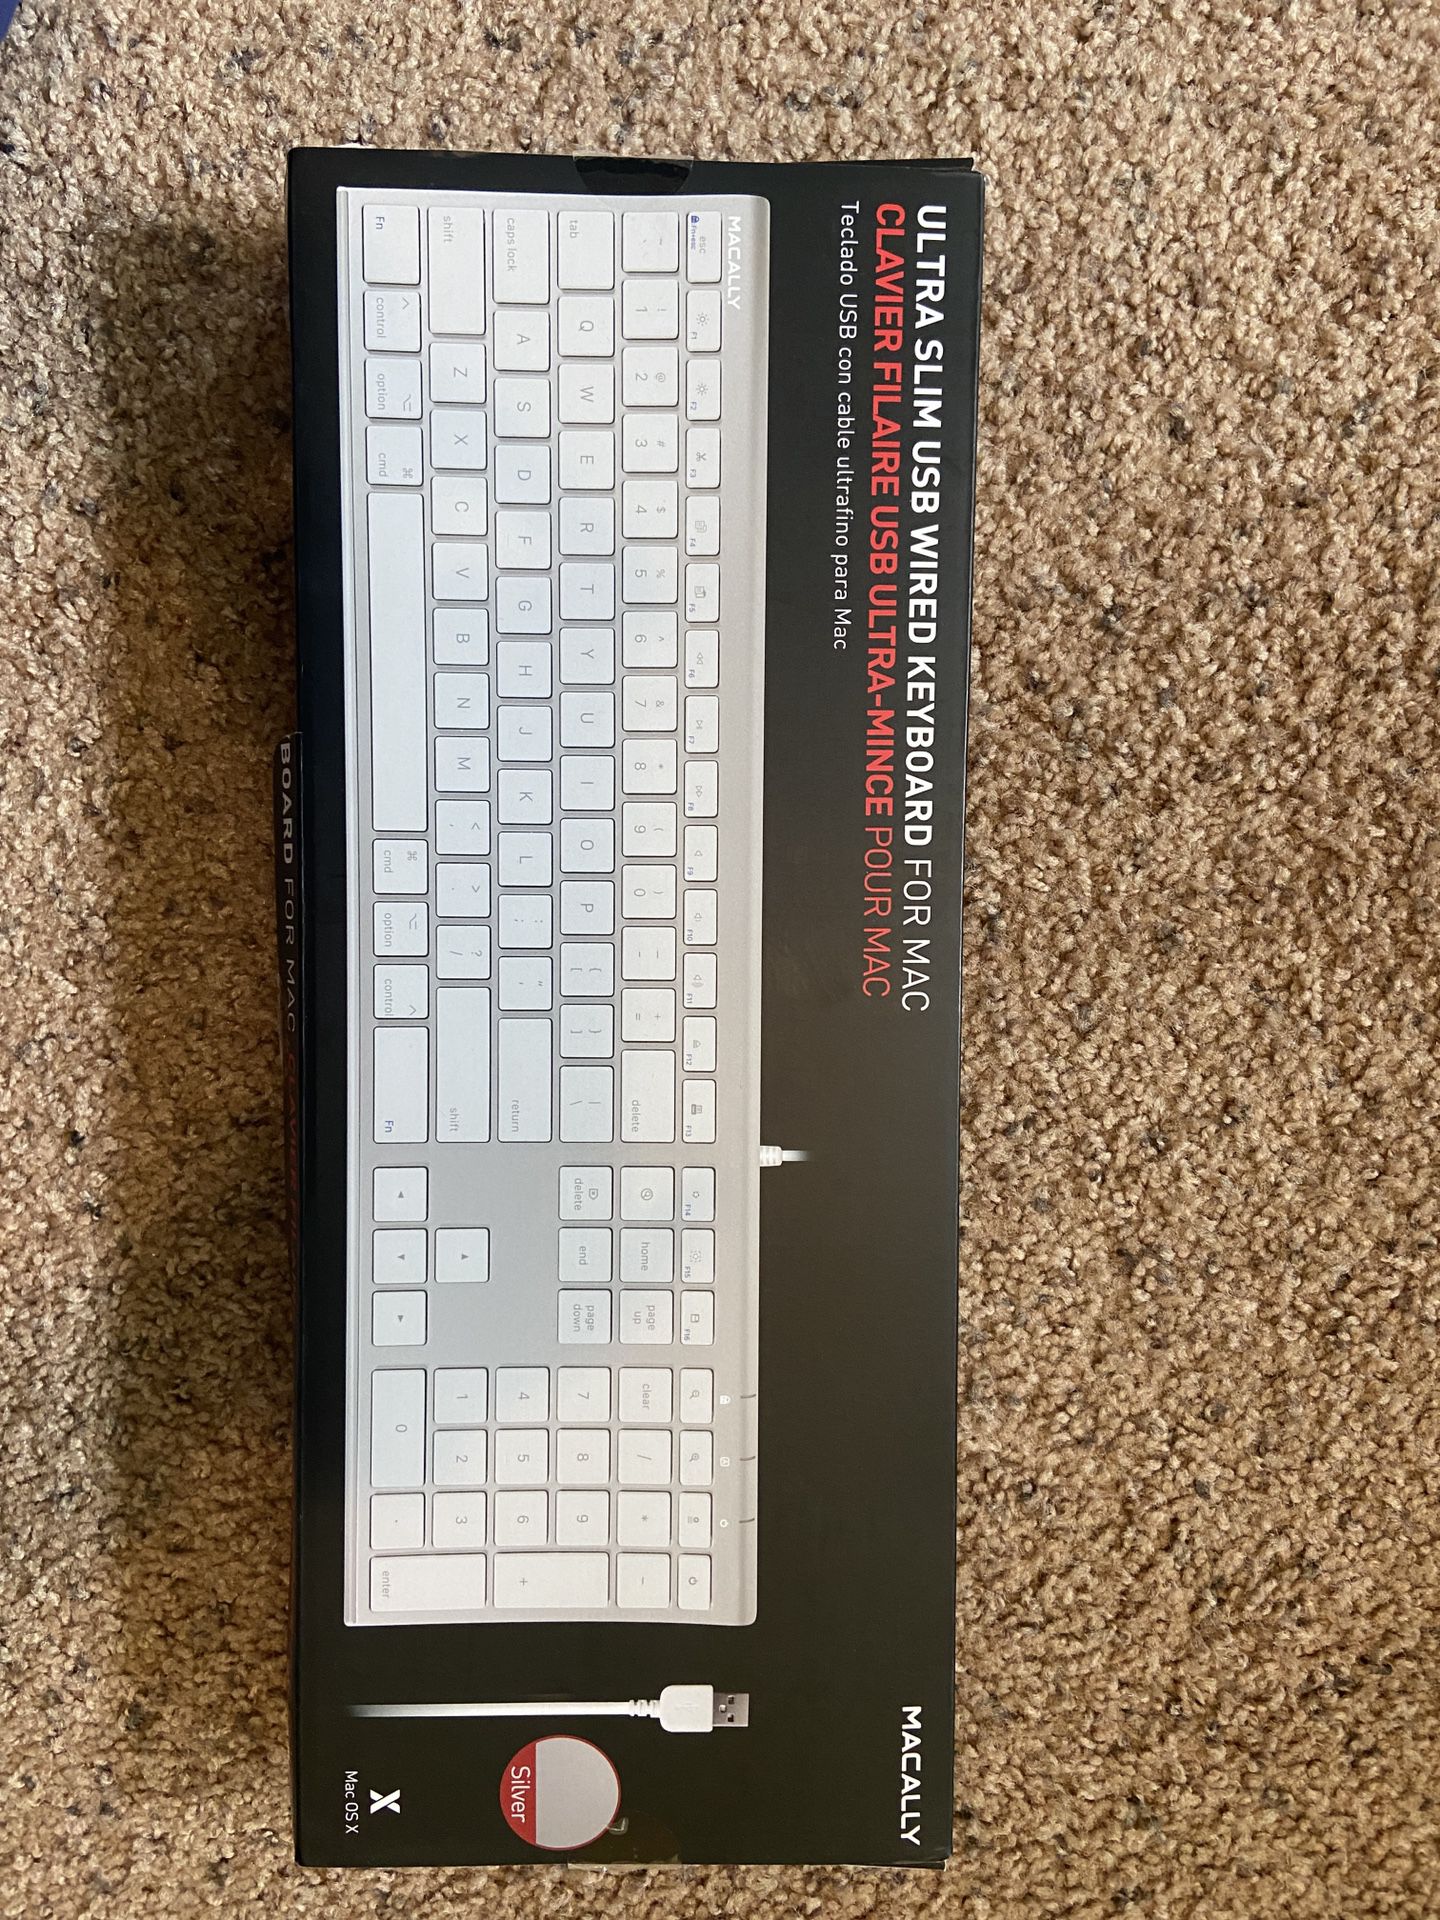 Macally Ultra SlimUSB Wired Keyboard 